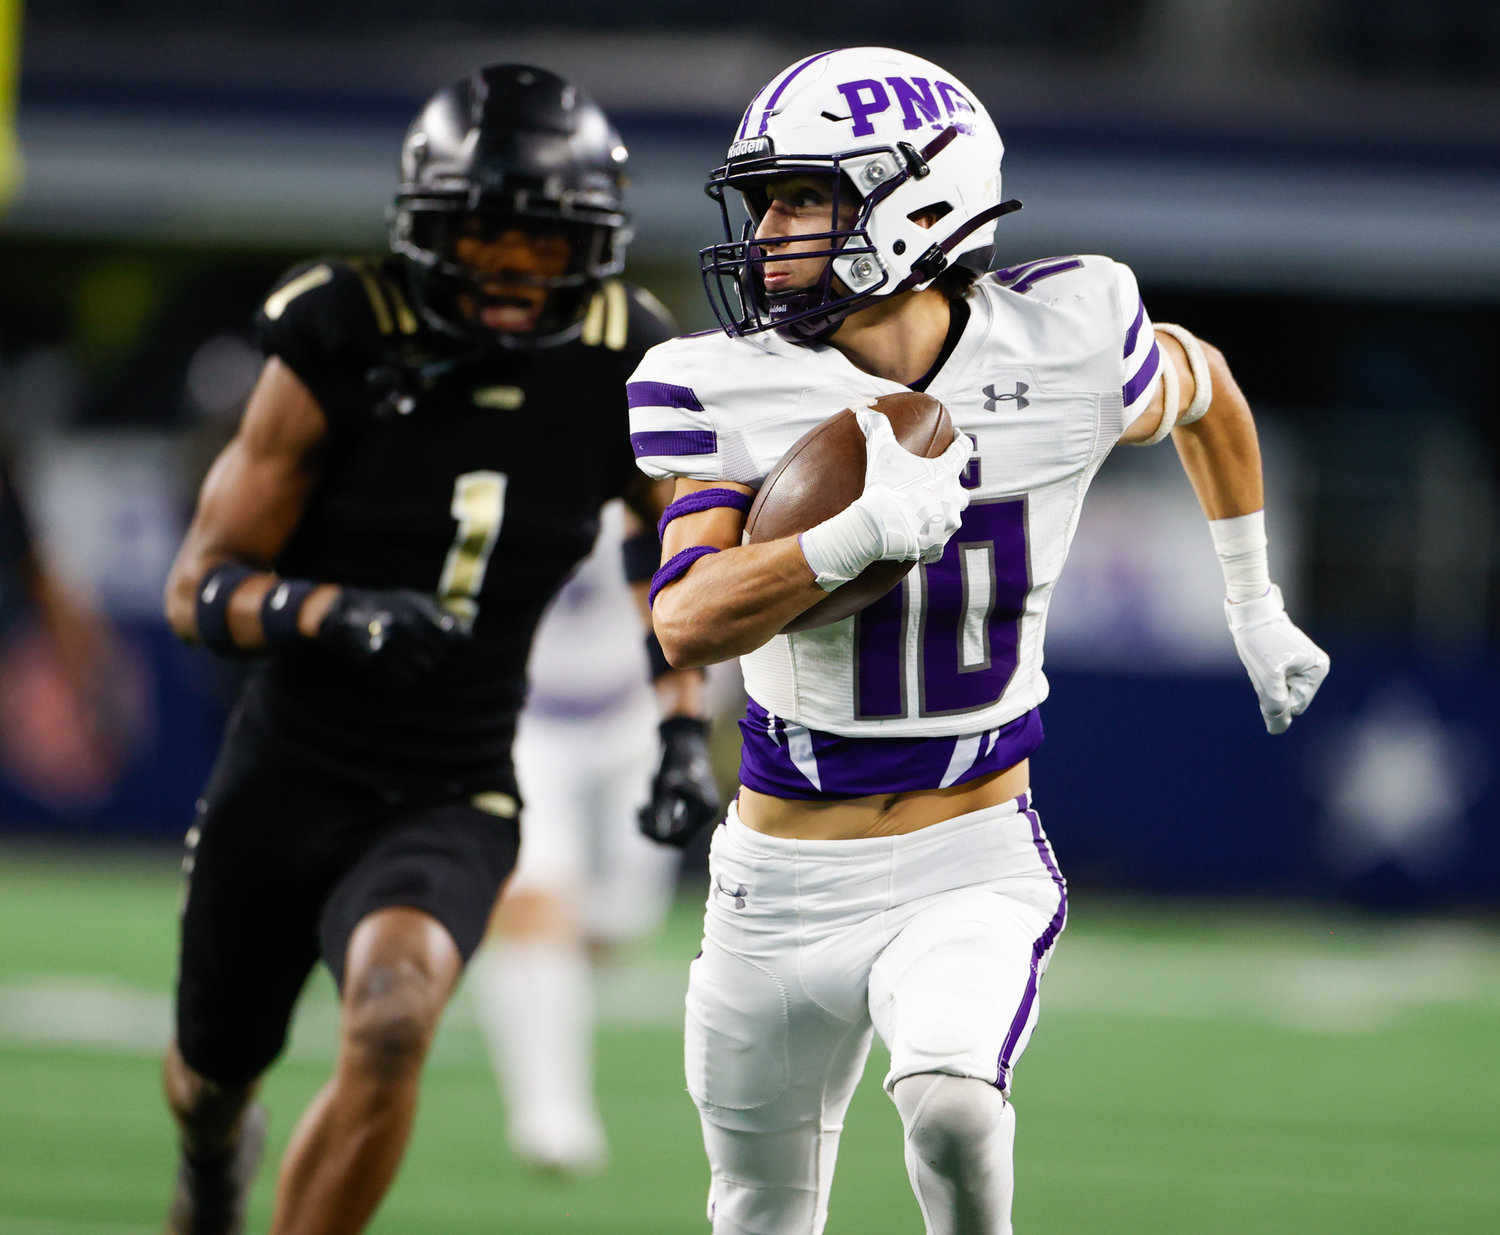 Port Neches-Groves defensive back Landon Guarnere (10) carries the ball for a touchdown after a catch during the Class 5A Division II football state championship game between South Oak Cliff and Port Neches-Groves in Arlington, Texas, on Dec. 16, 2022.